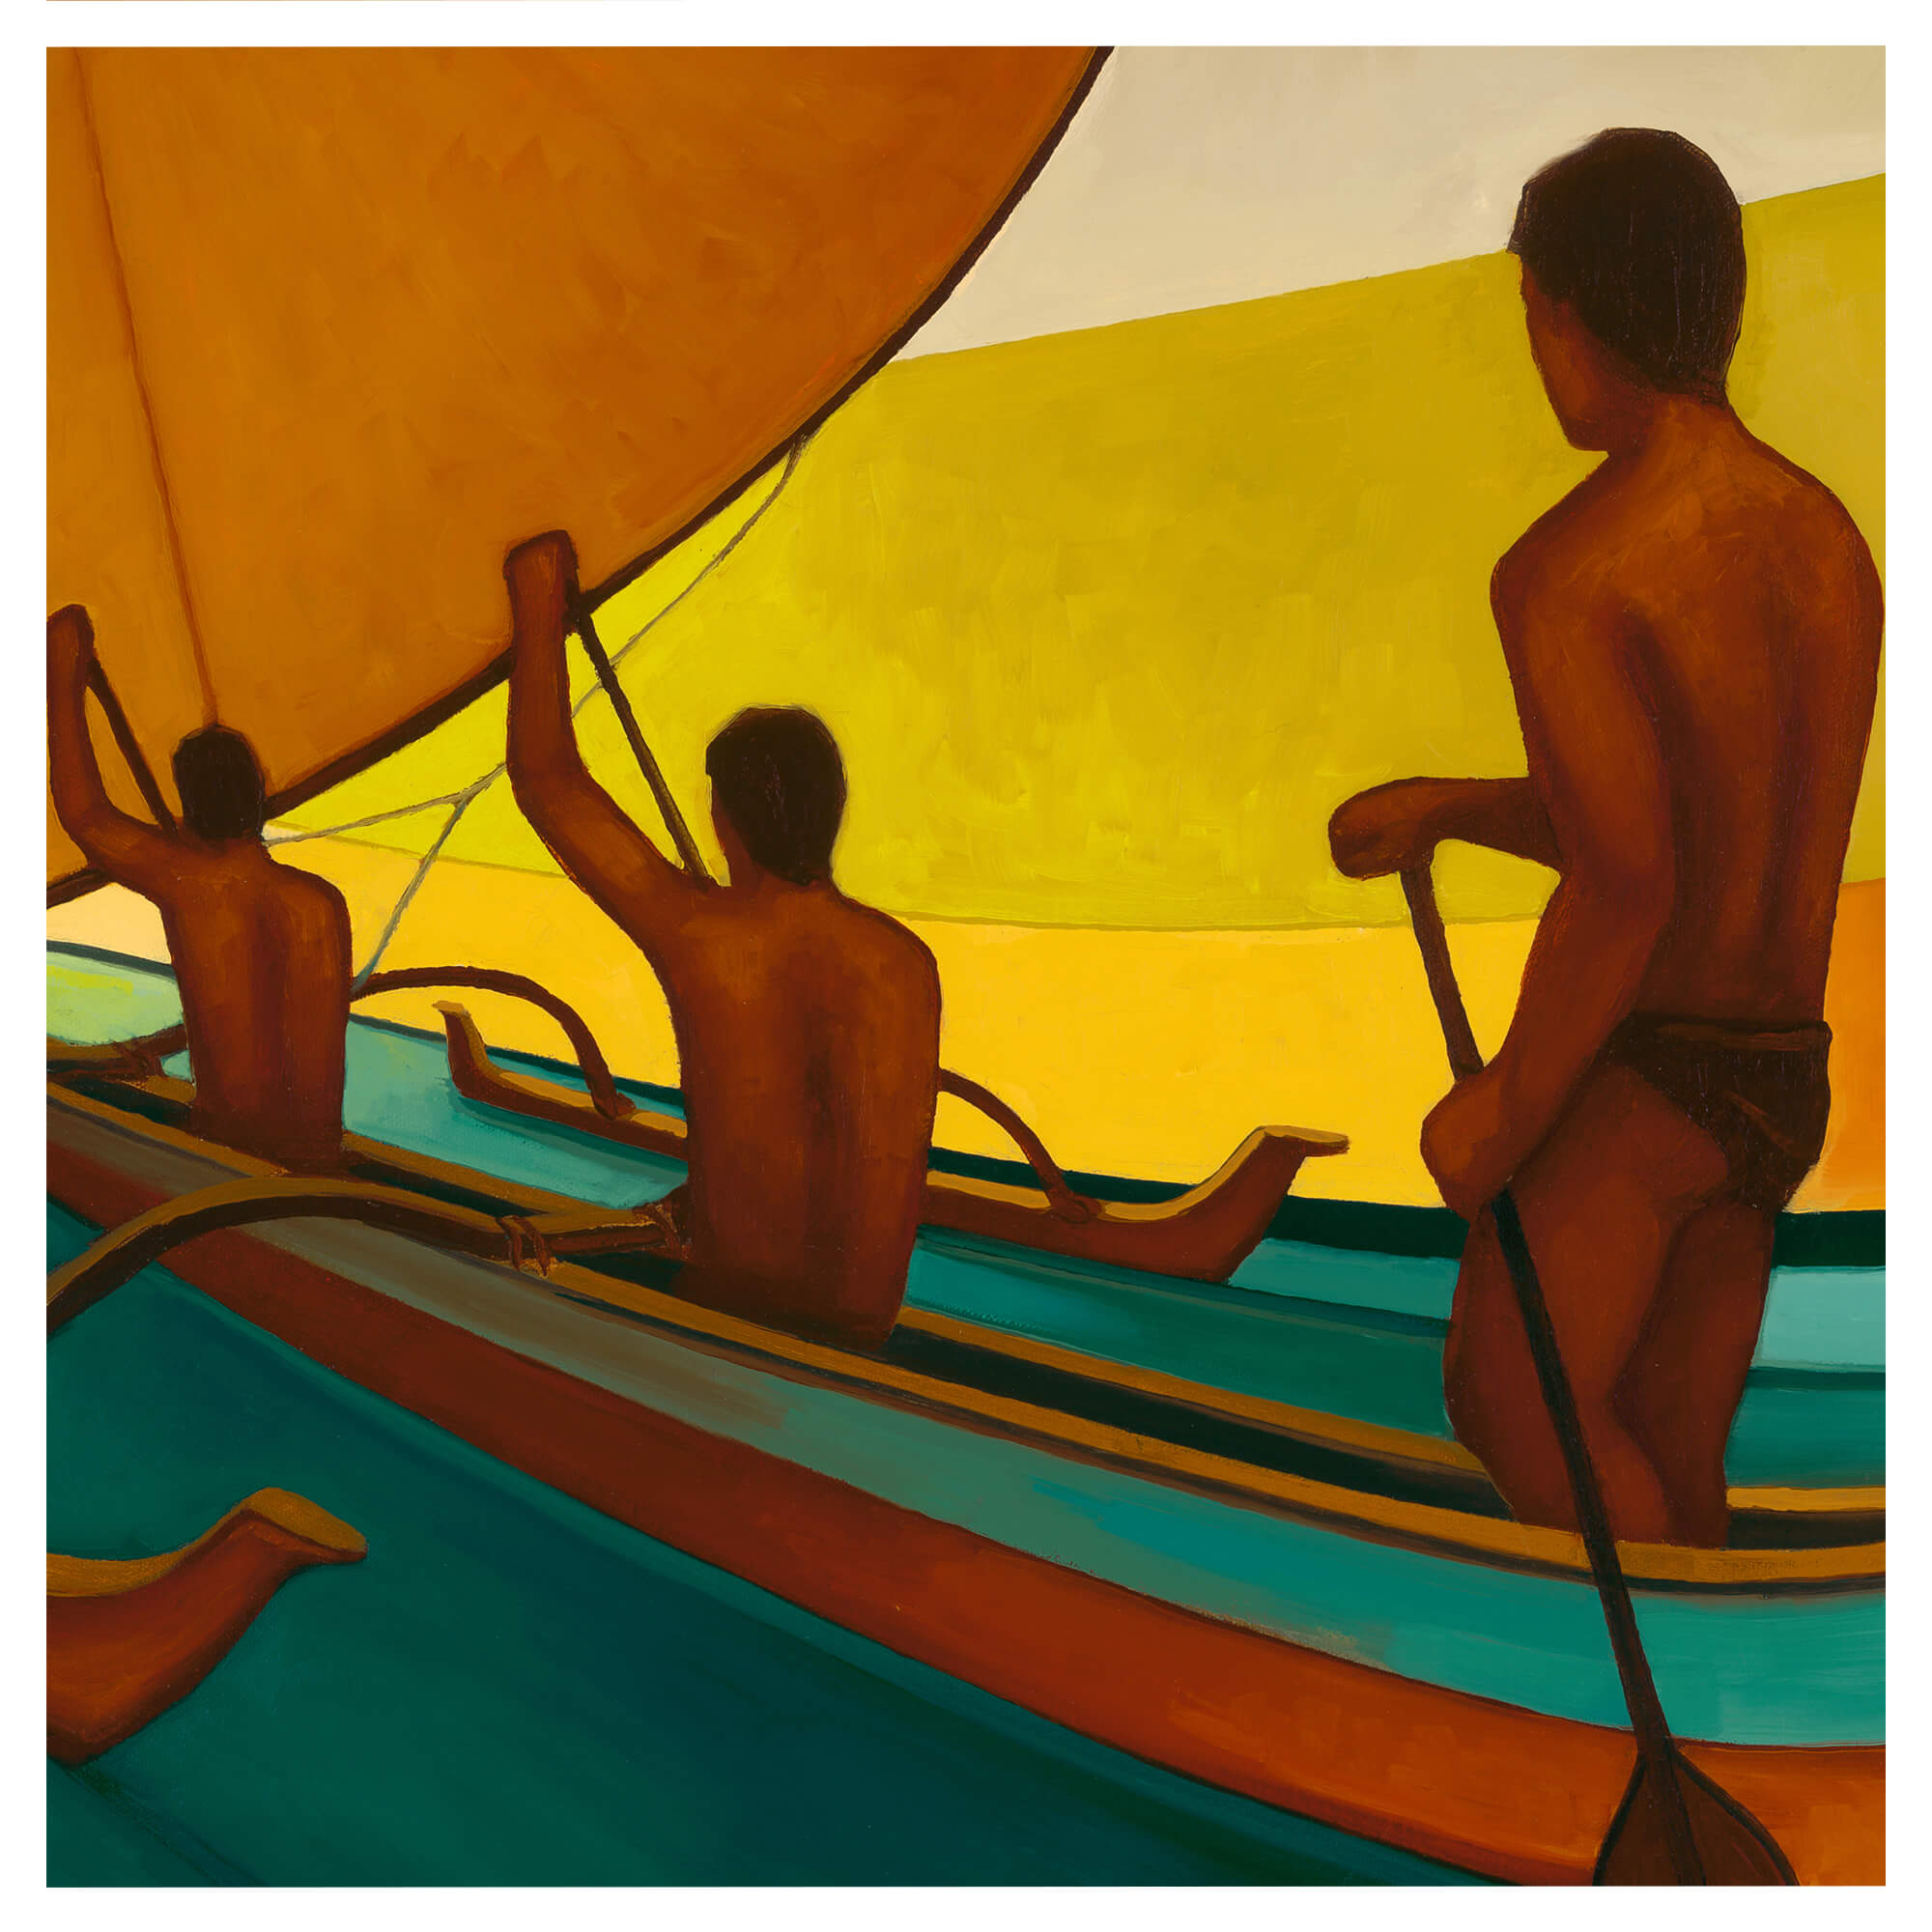 Men in a boat by Hawaii artist Colin redican